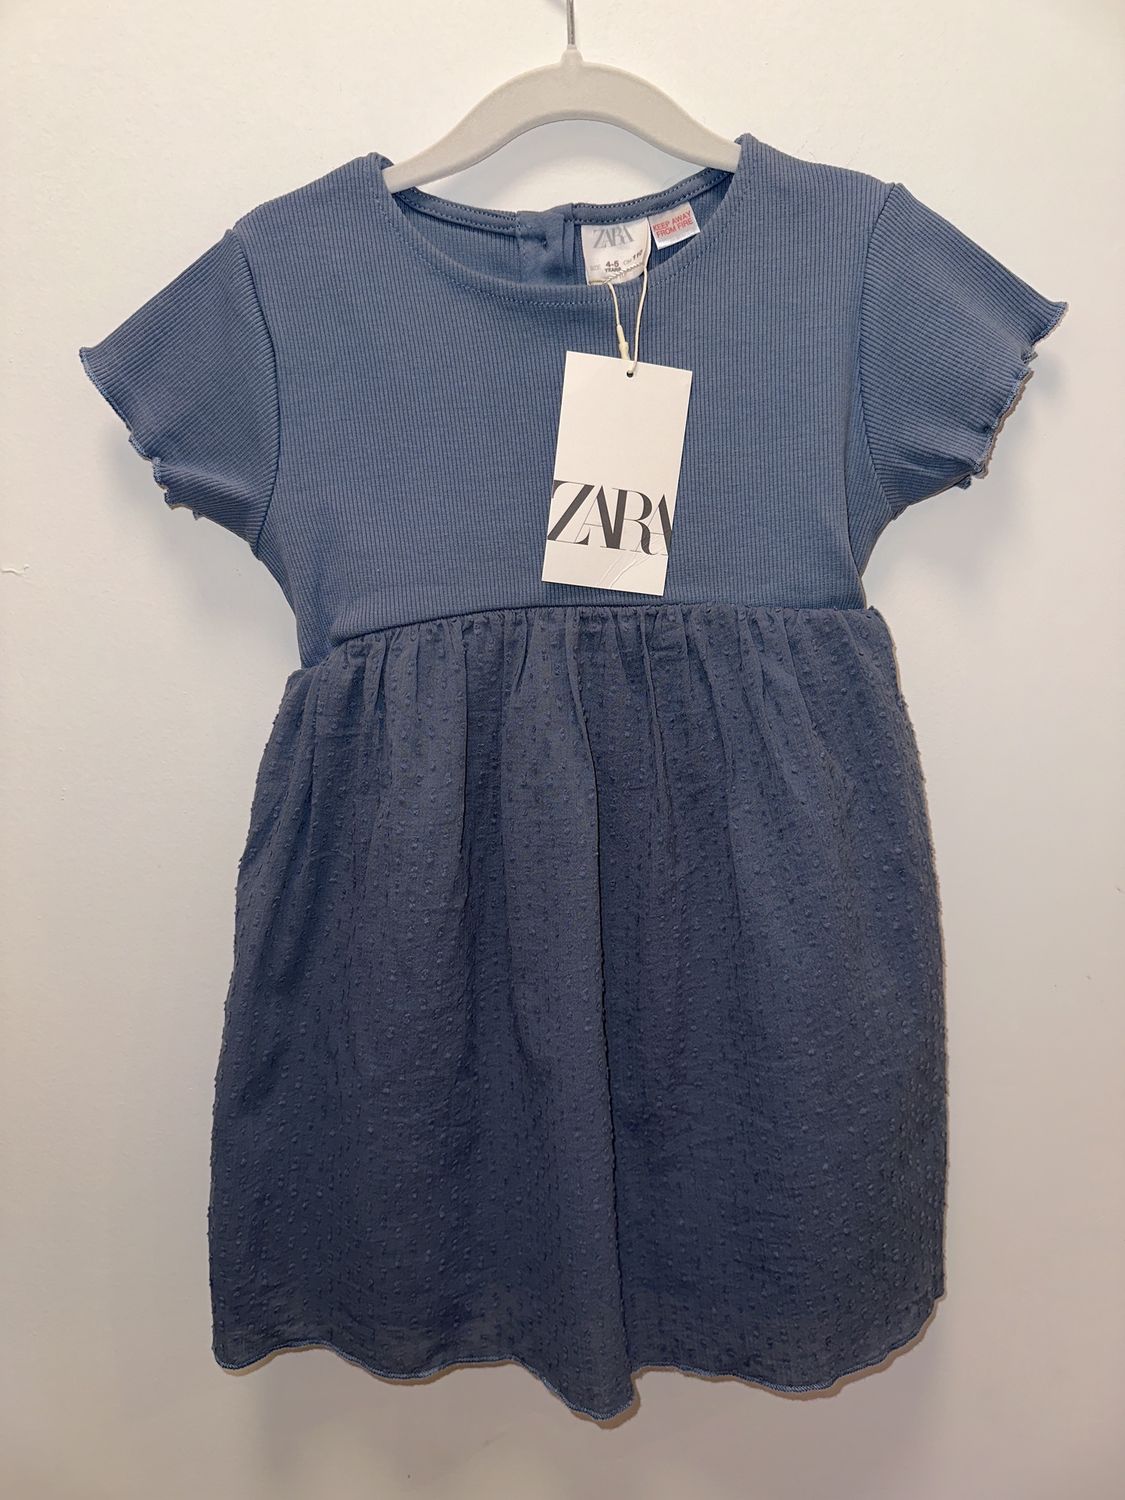 New with Tags - Zara - Play Dresses - 4-5T - PWE966